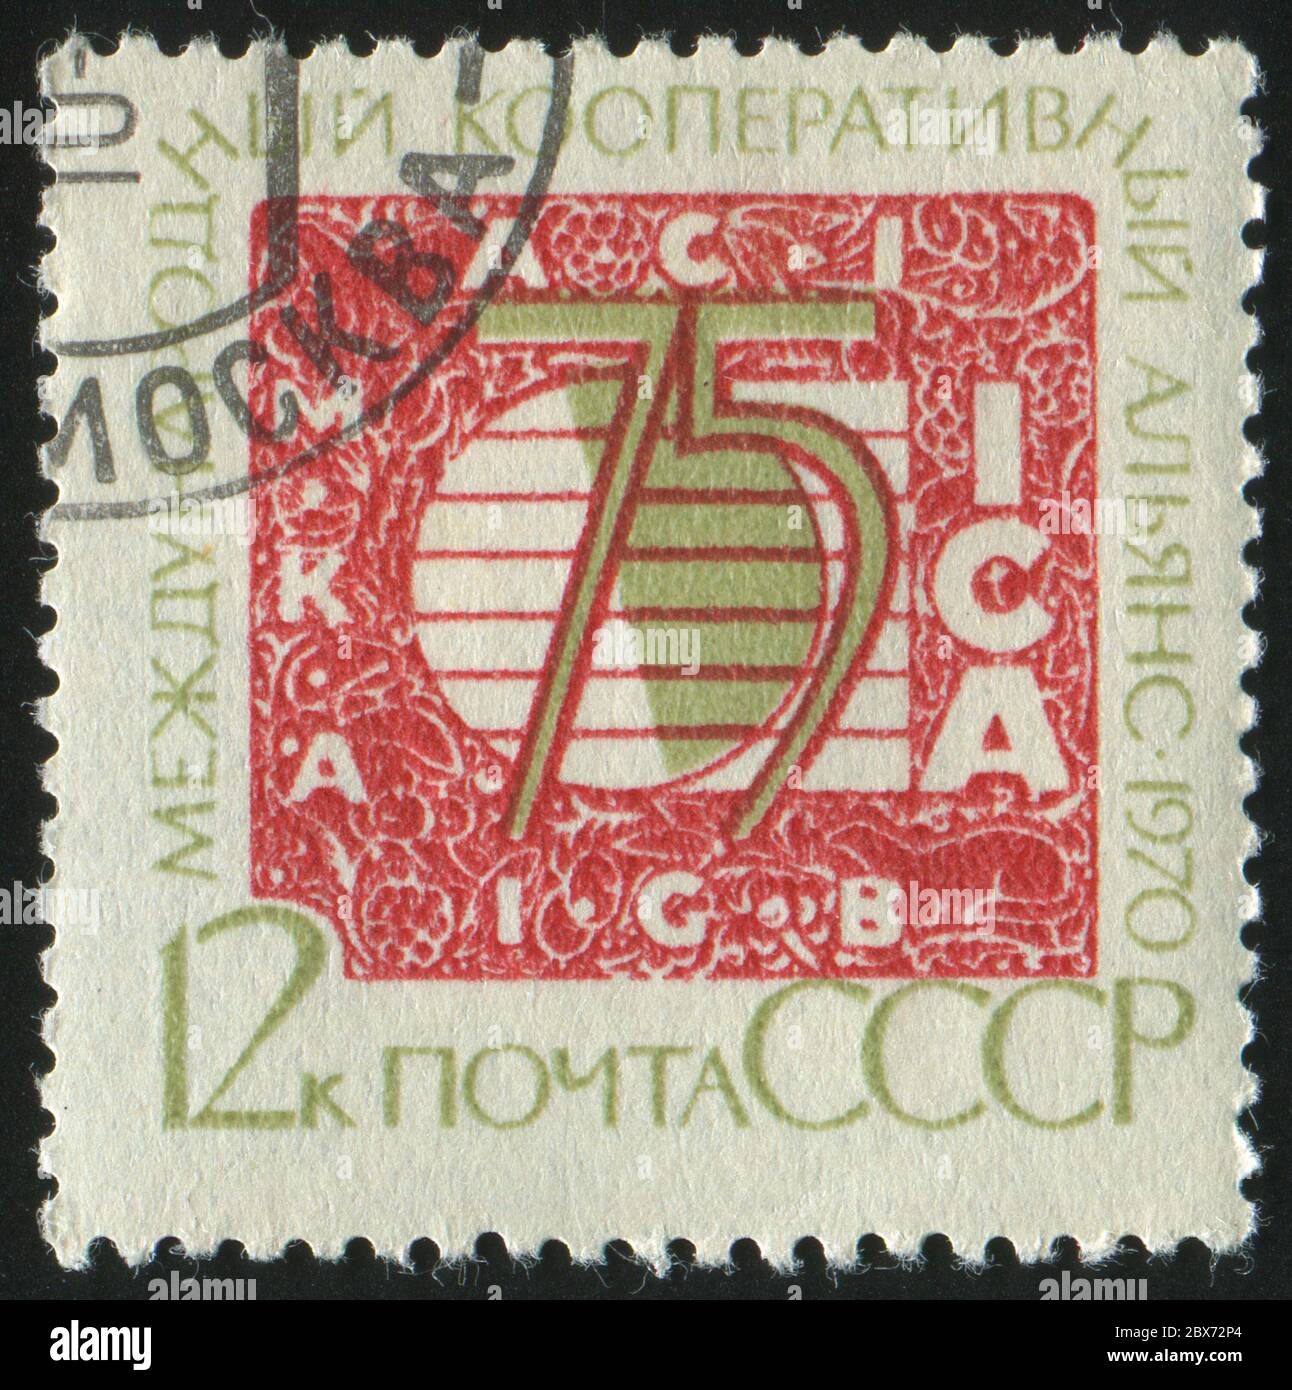 RUSSIA - CIRCA 1970: stamp printed by Russia, shows international Cooperative Alliance, circa 1970. Stock Photo